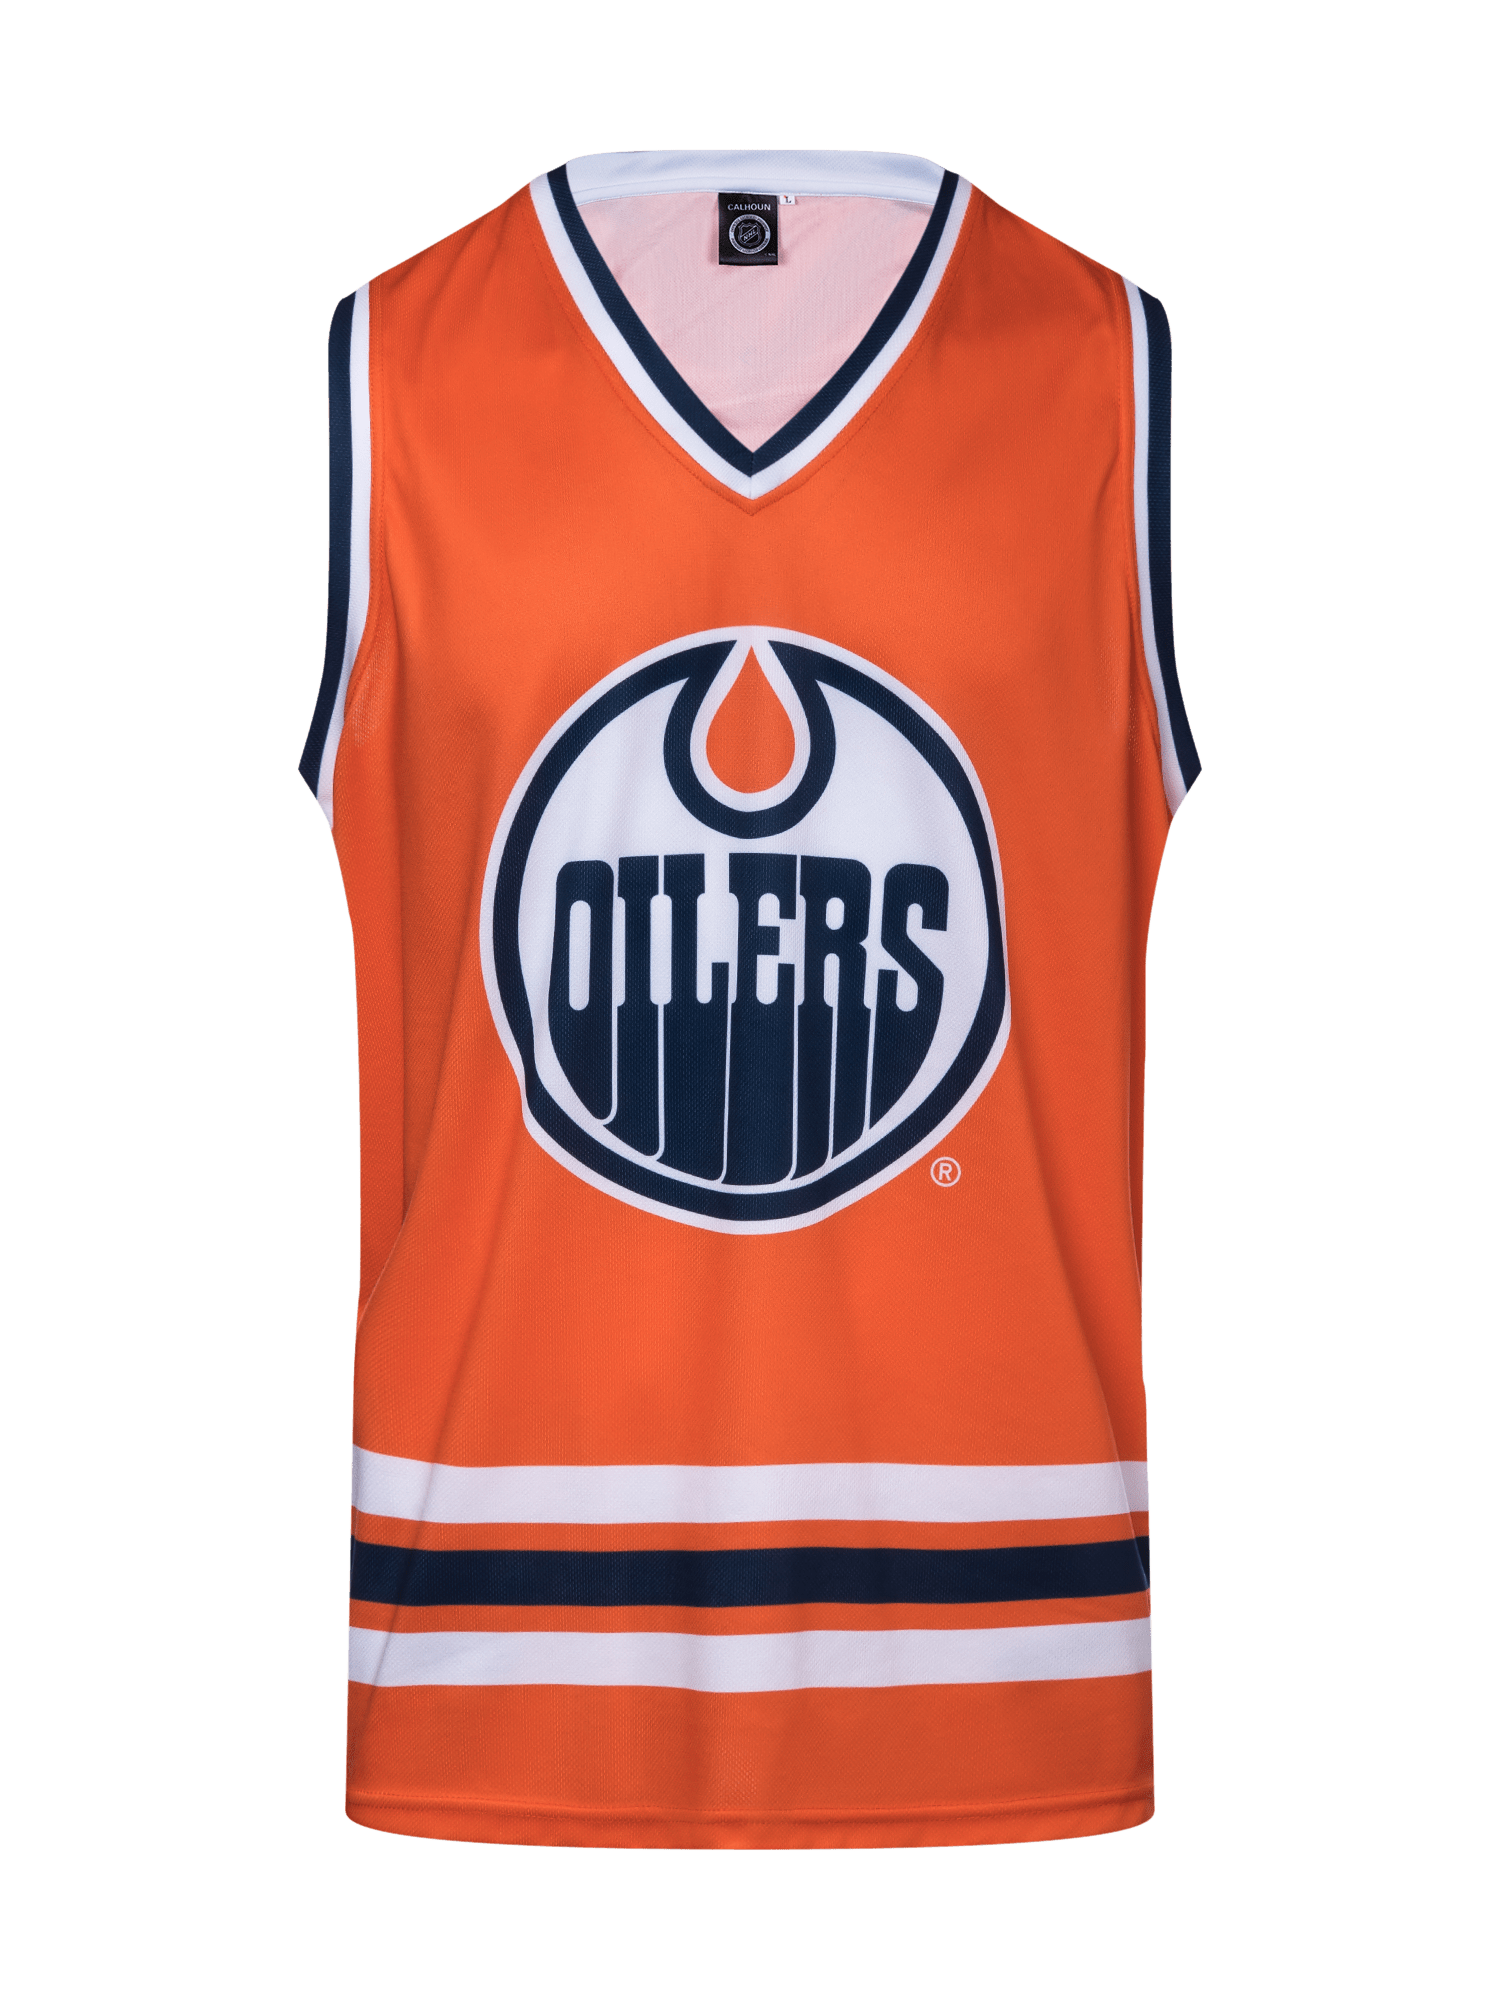 You're Going To See A Lot Of The Navy Blue Oilers Jersey In 2021